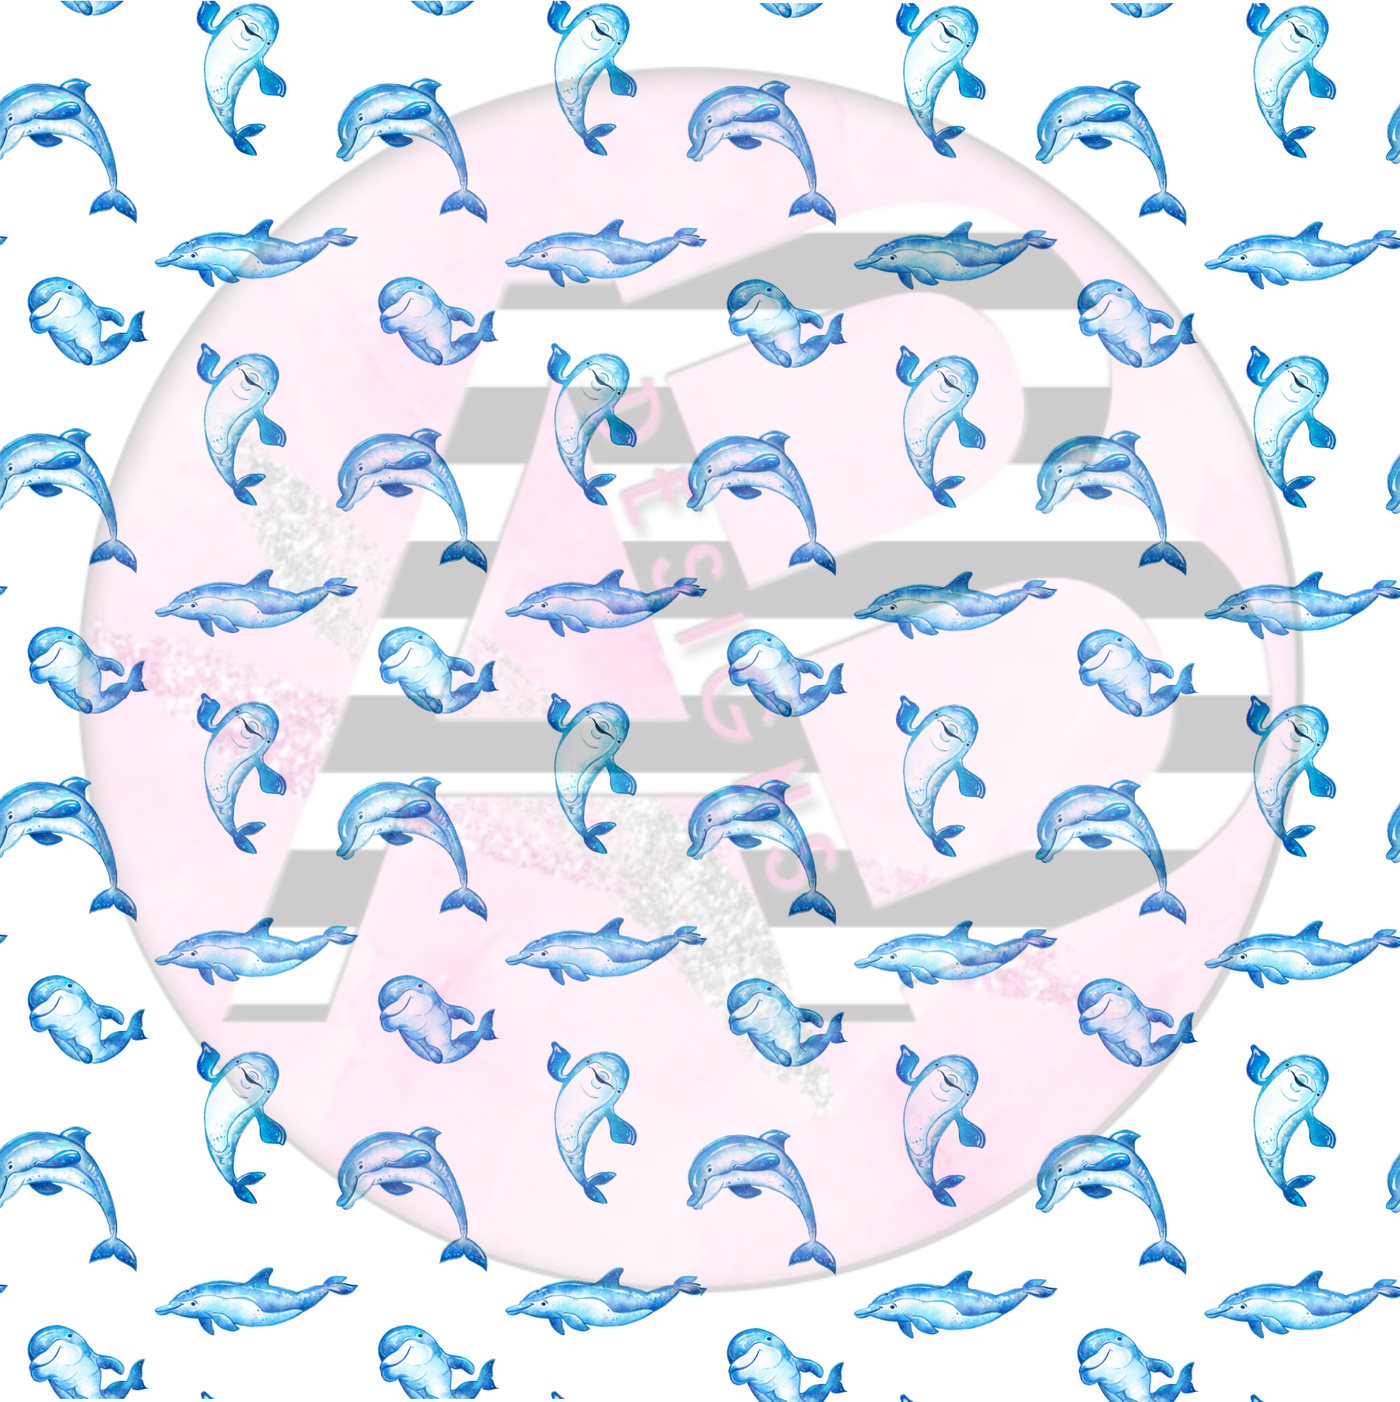 Adhesive Patterned Vinyl - Dolphin 04 Smaller